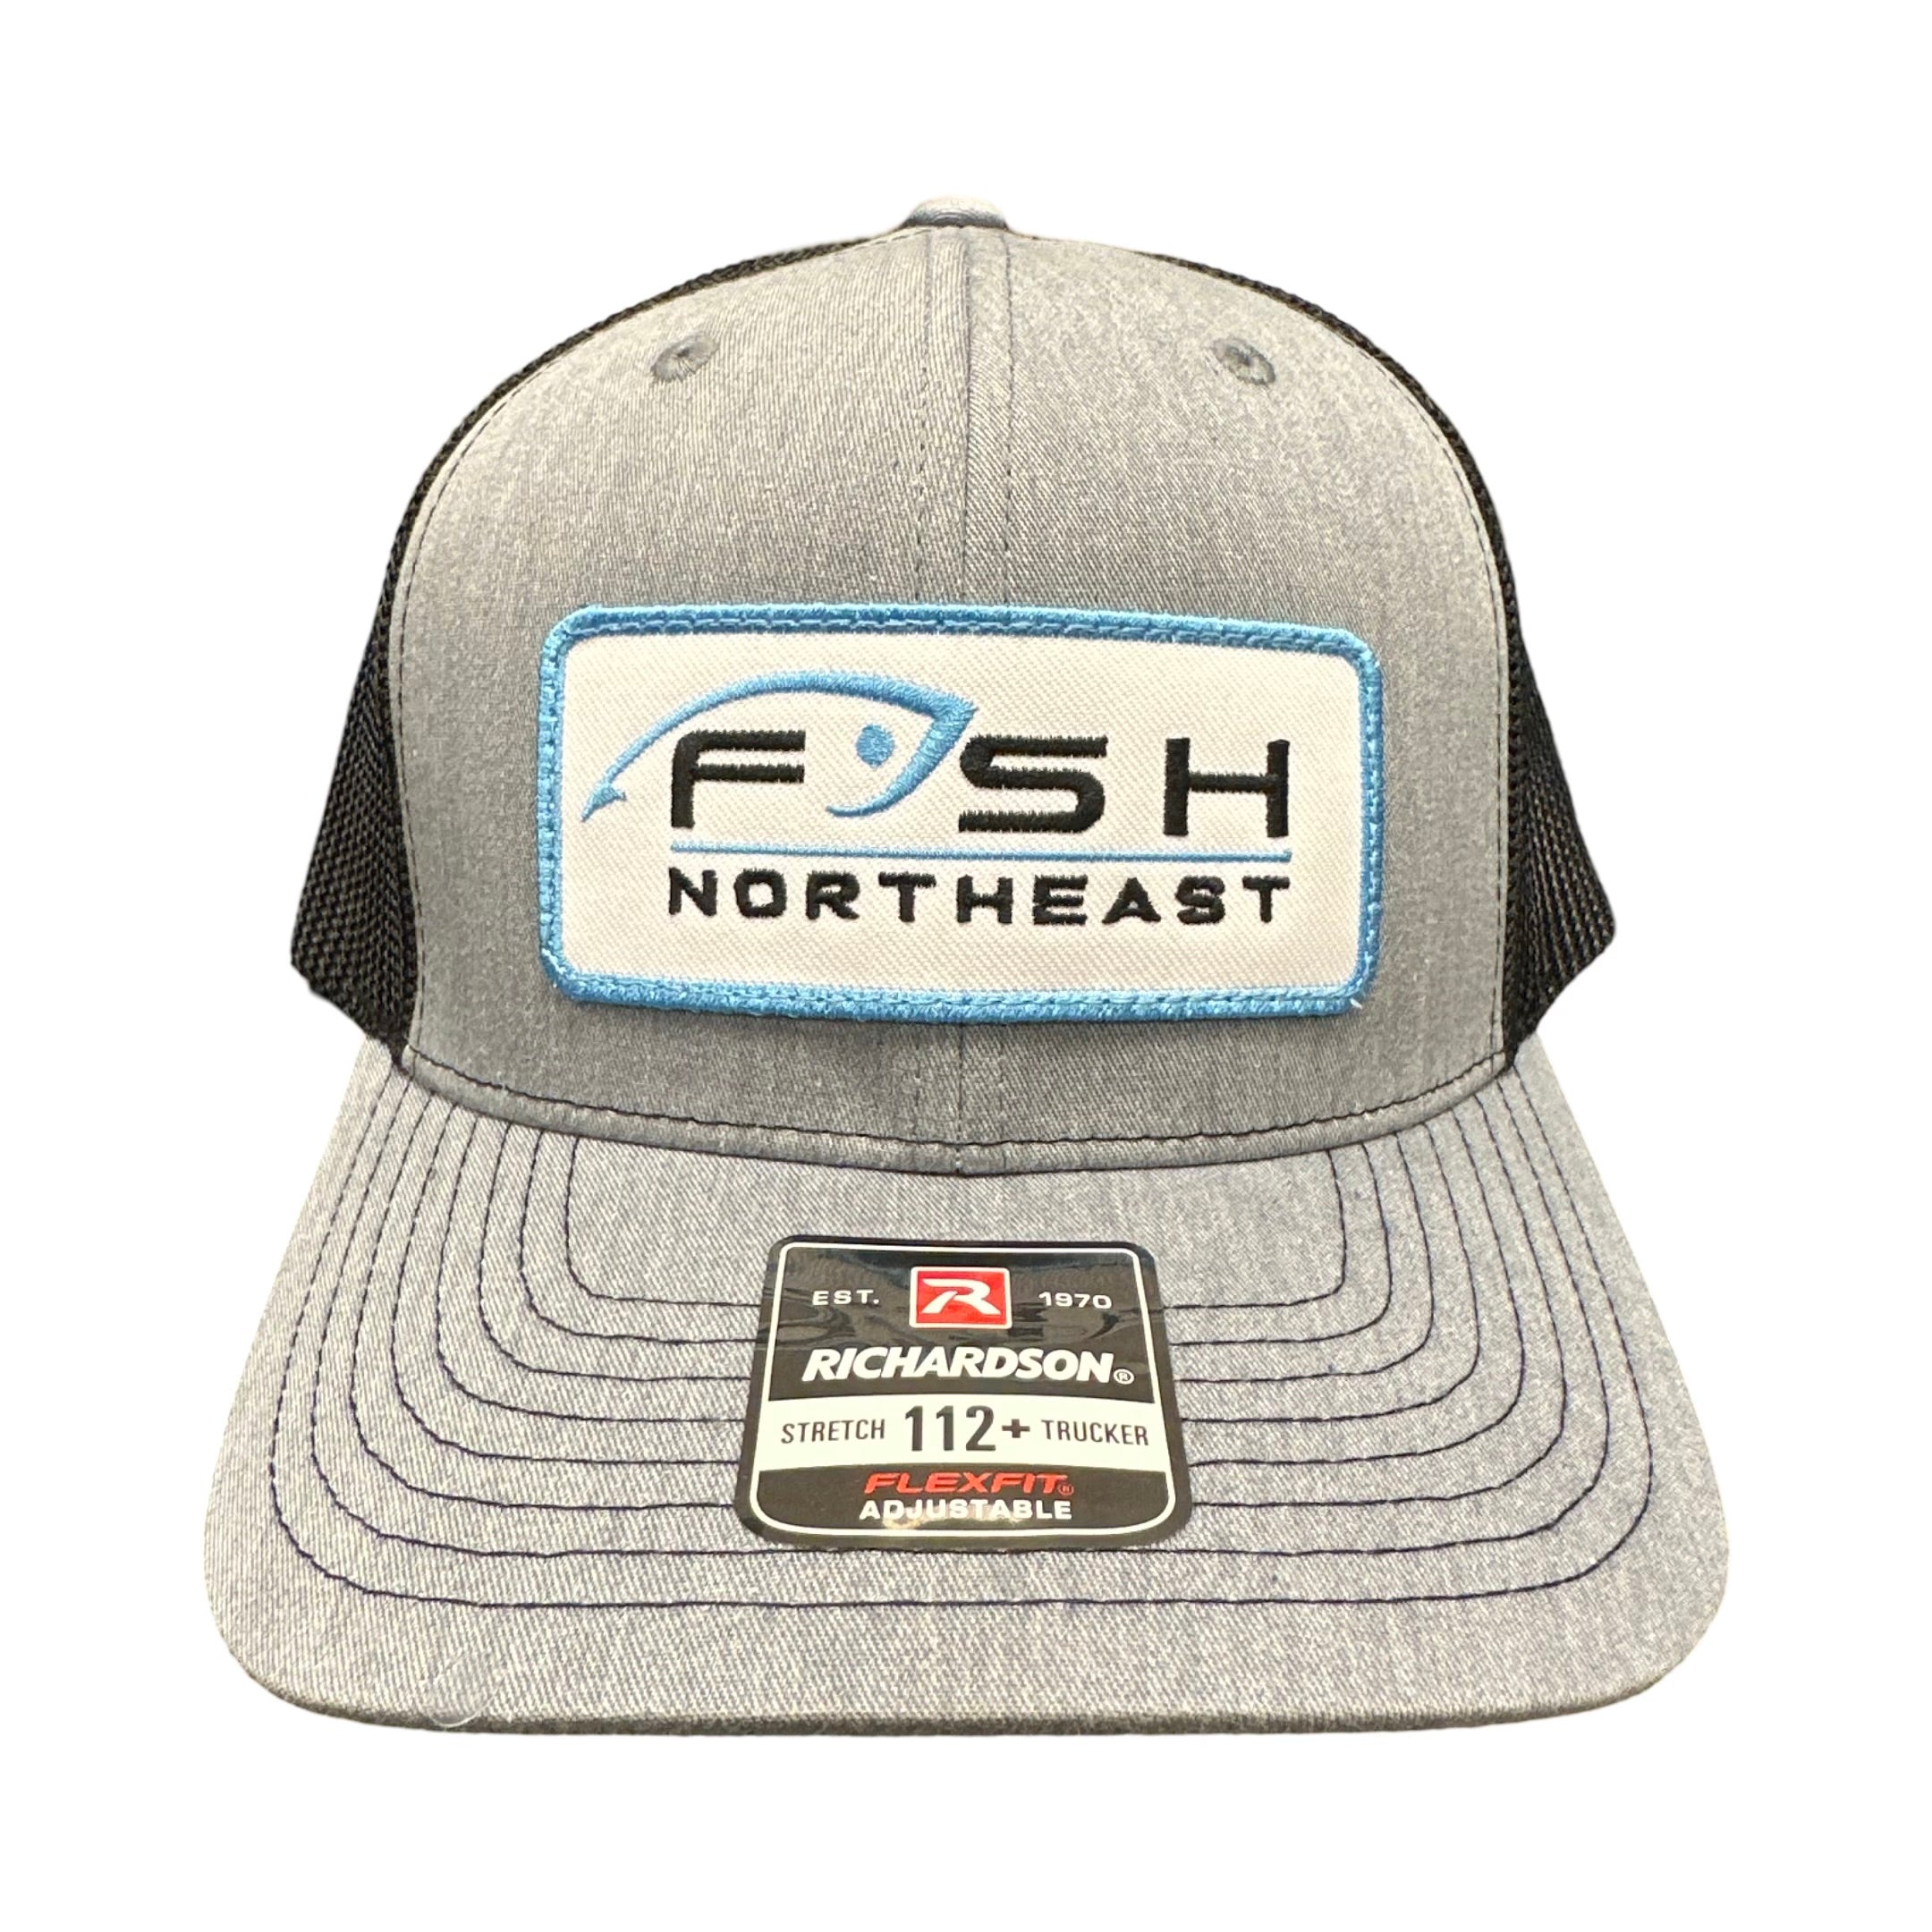 FISH & Tackle - FISH Northeast Stretch Trucker Patch Hat